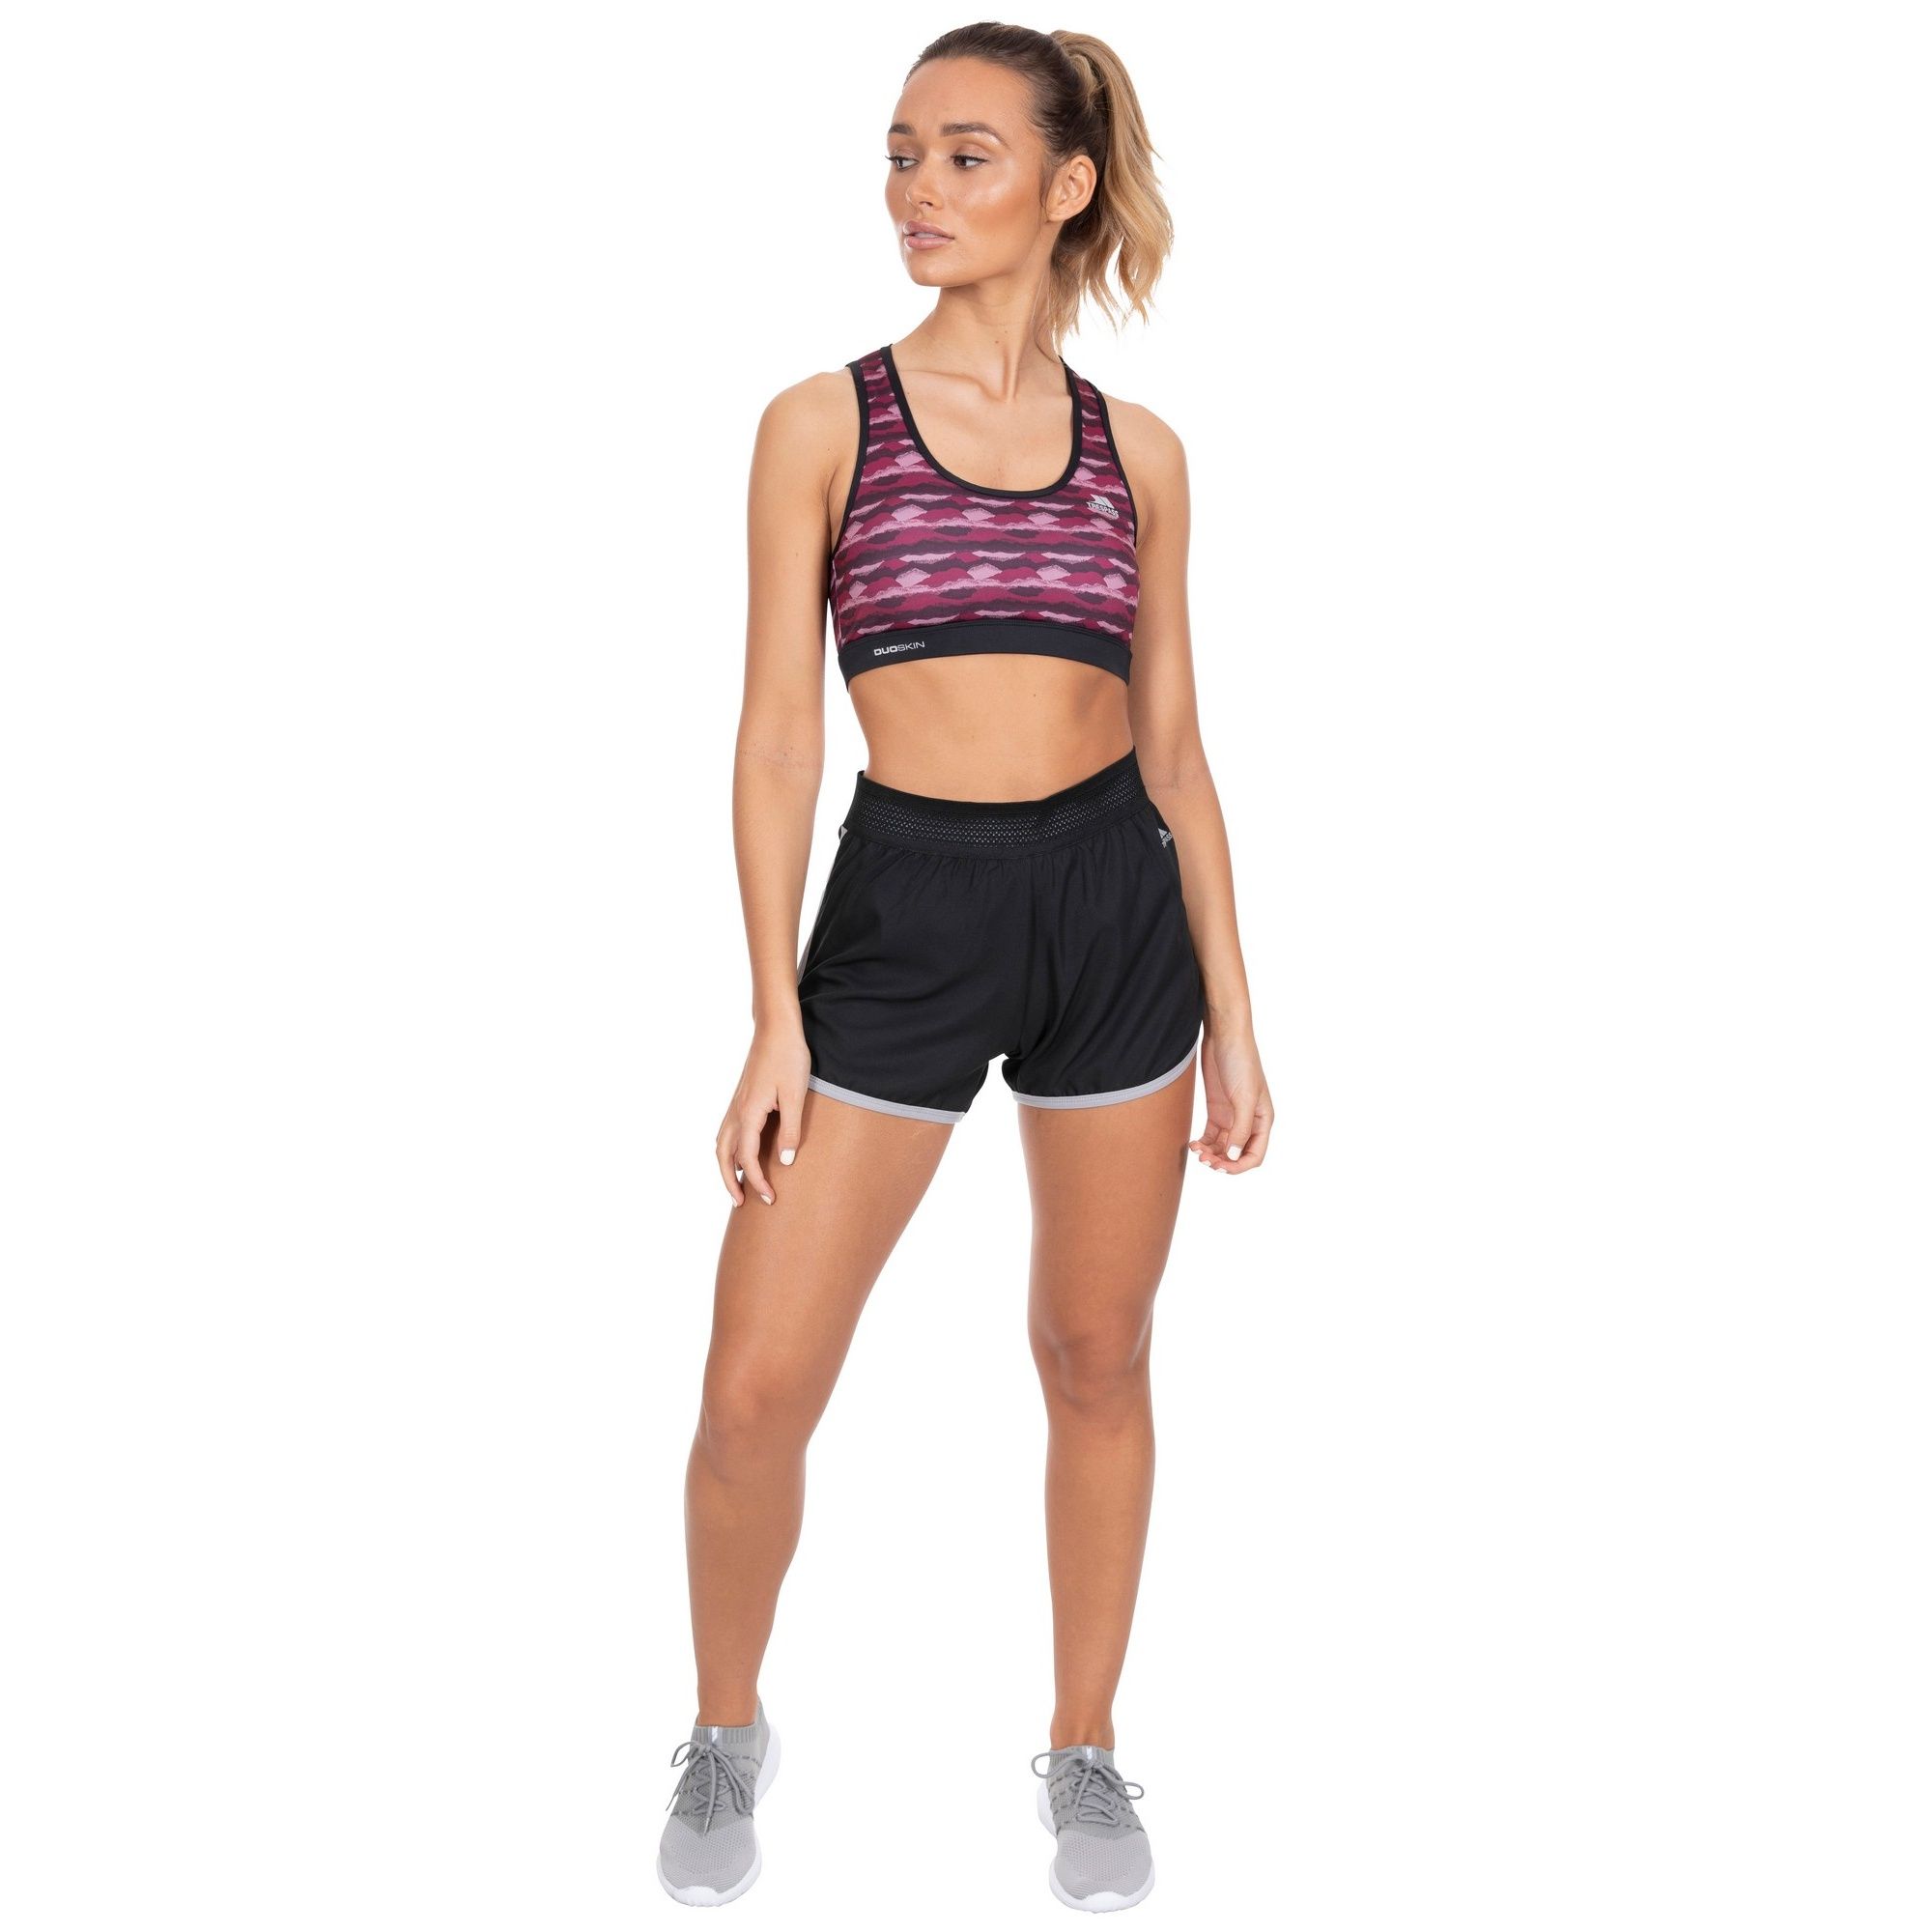 90% Polyester, 10% Elastane. All over print. Supportive fabric. Contrast trims. Reflective printed logos. Wicking. Quick dry. Trespass Womens Chest Sizing (approx): XS/8 - 32in/81cm, S/10 - 34in/86cm, M/12 - 36in/91.4cm, L/14 - 38in/96.5cm, XL/16 - 40in/101.5cm, XXL/18 - 42in/106.5cm.